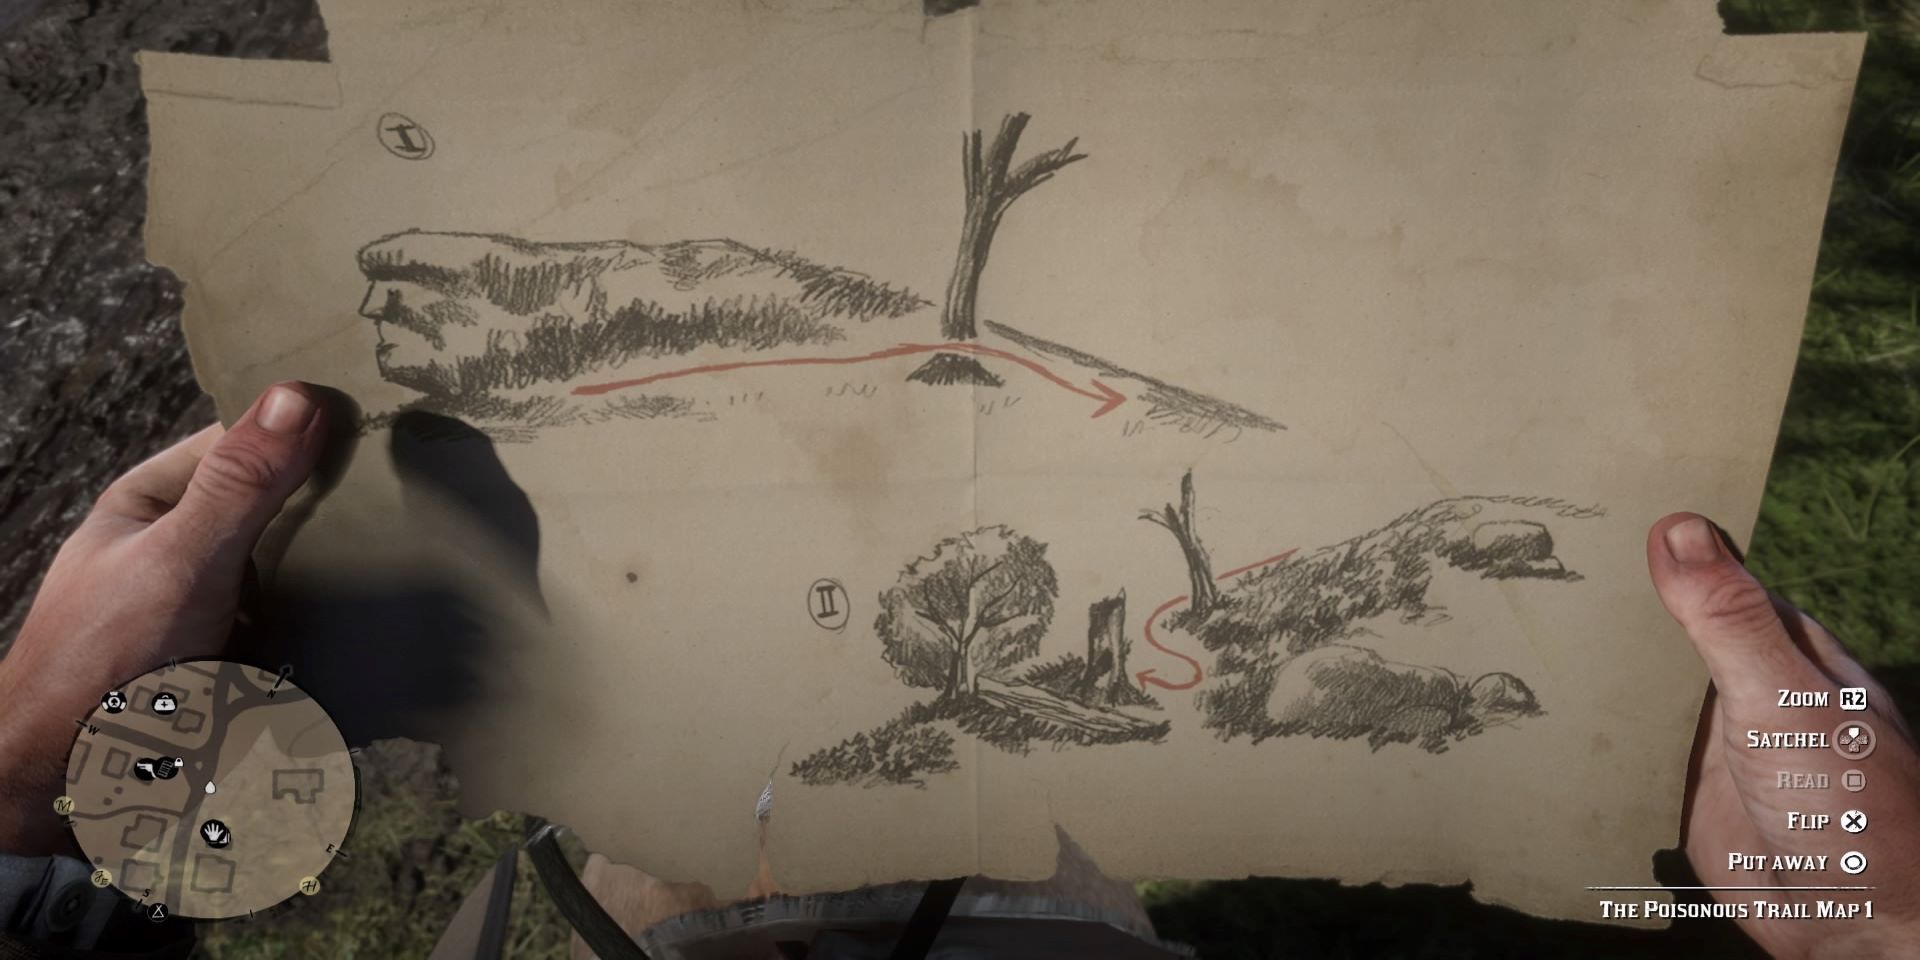 Watching a drawing in two parts that shows a treasure's location.